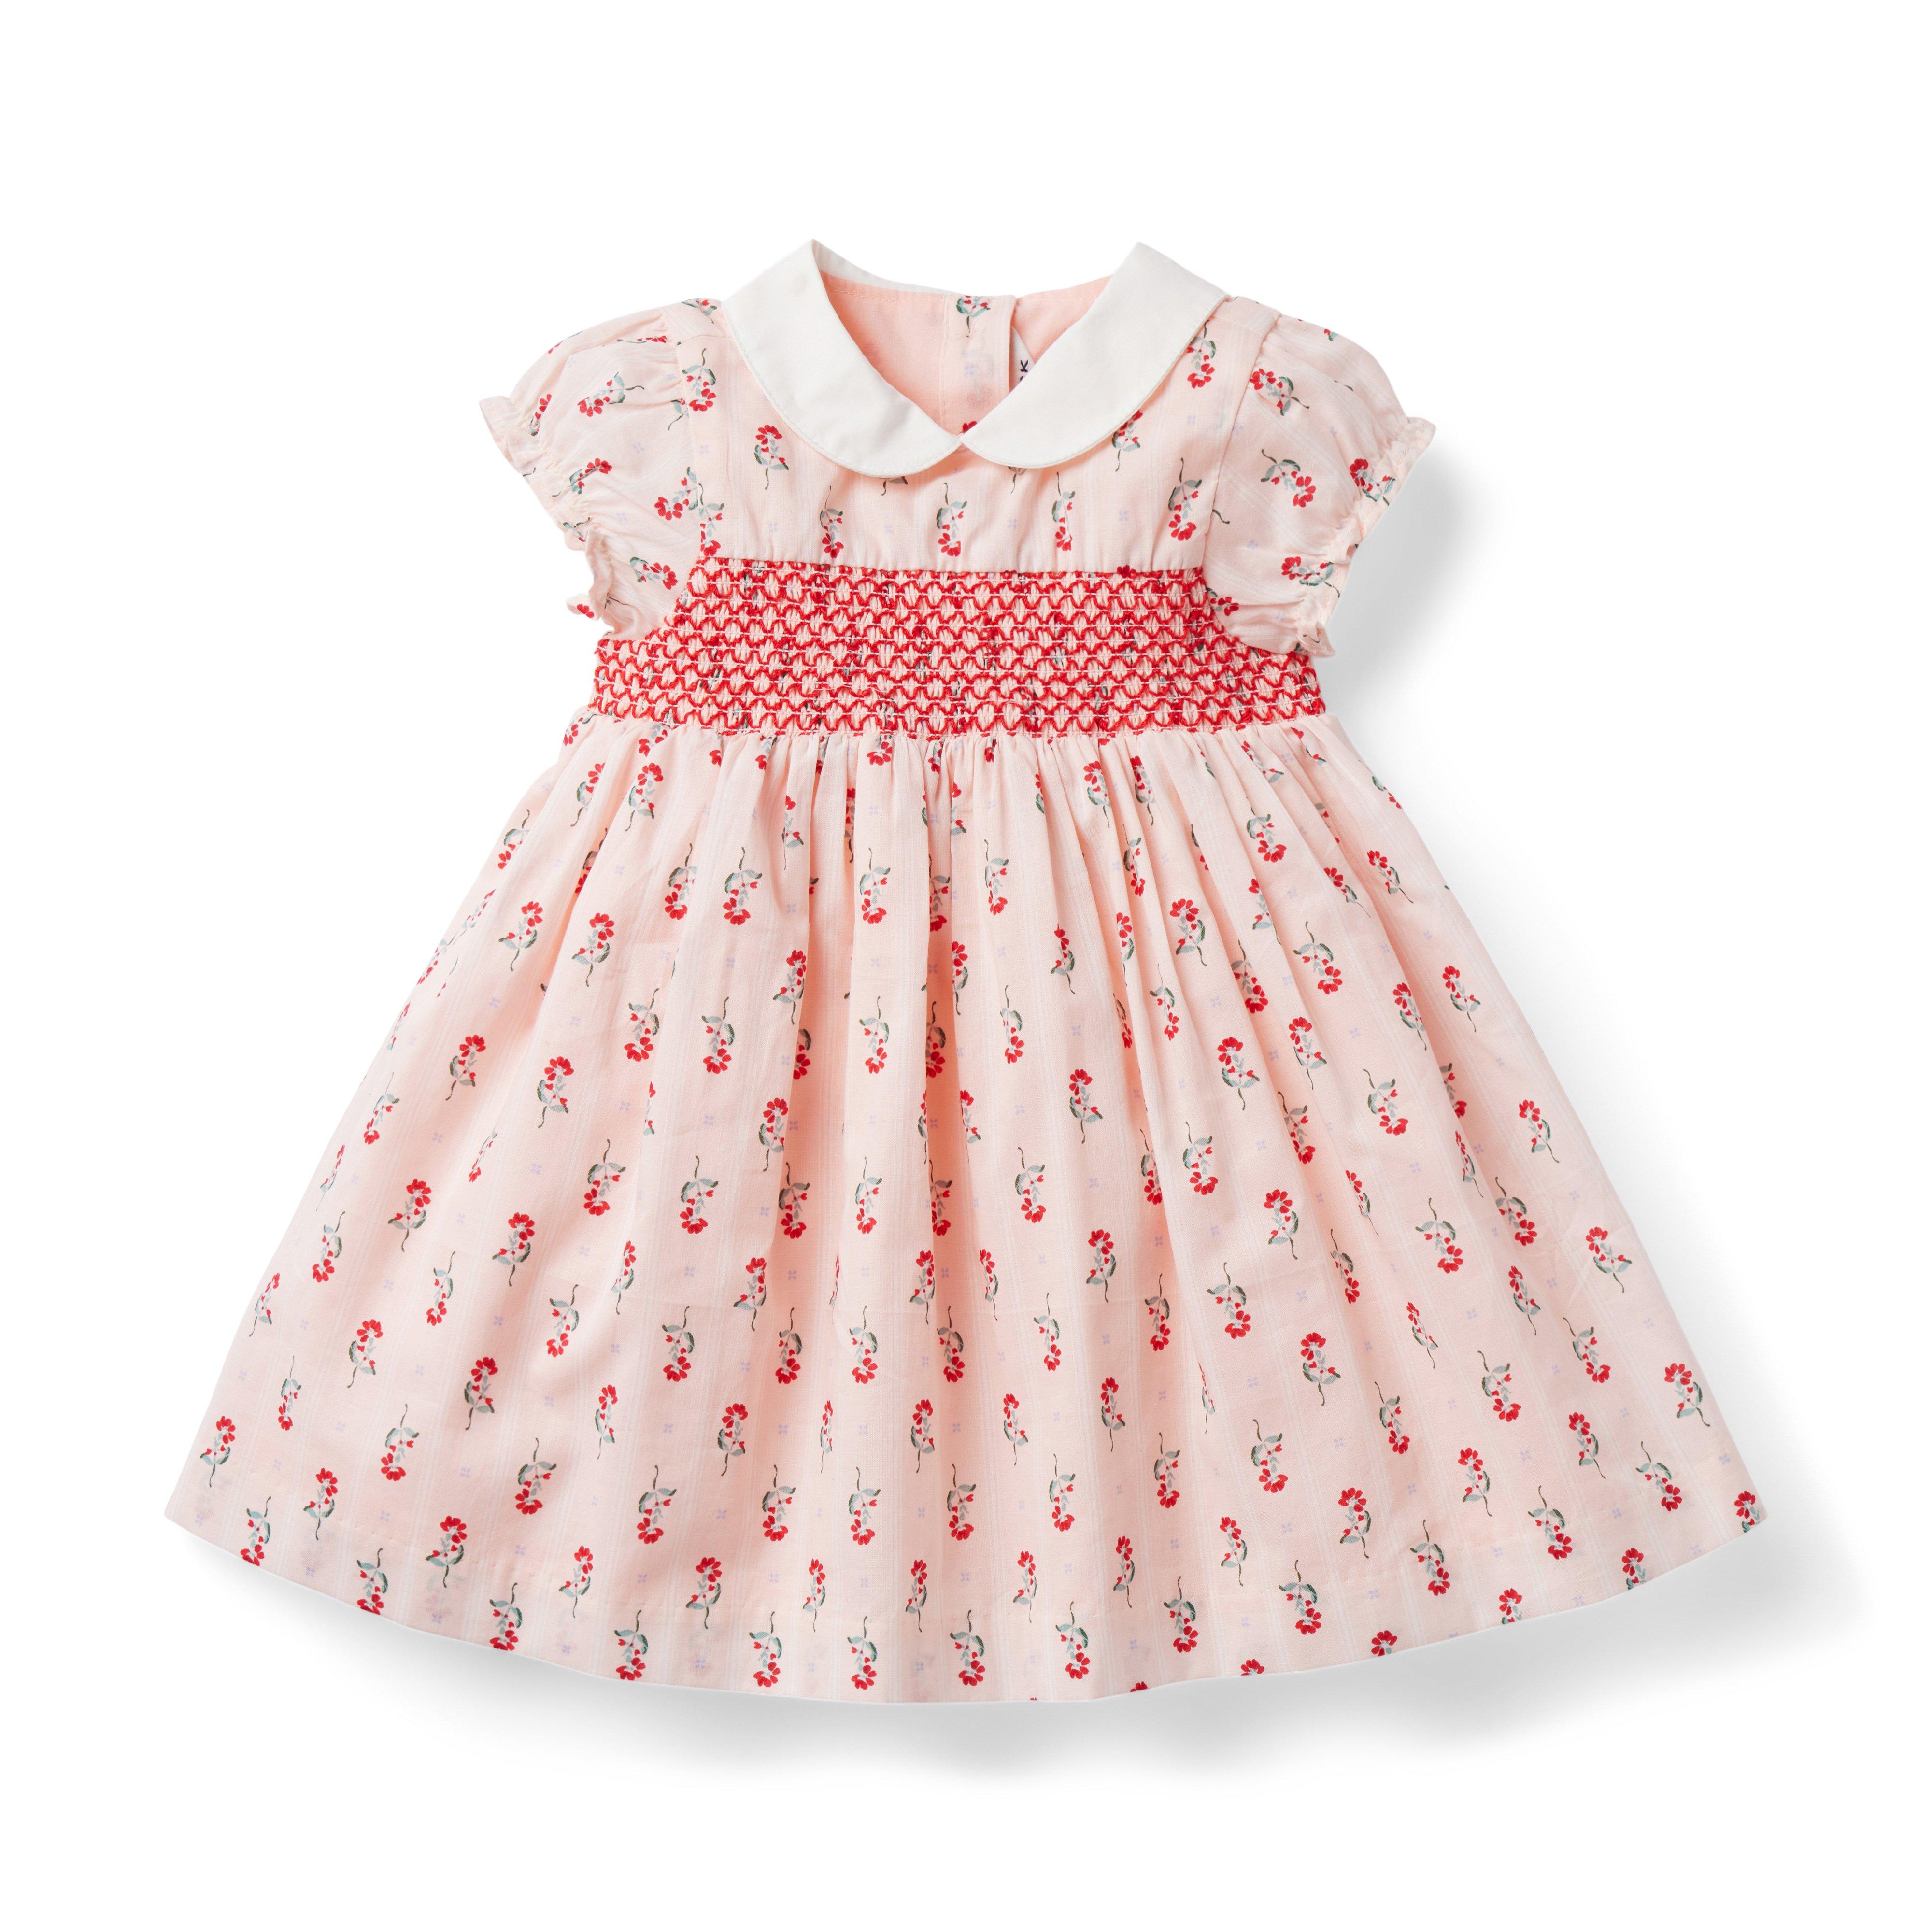 Friedknit Creations Baby Girls 12-24 Months Floral Printed Smocked Dress